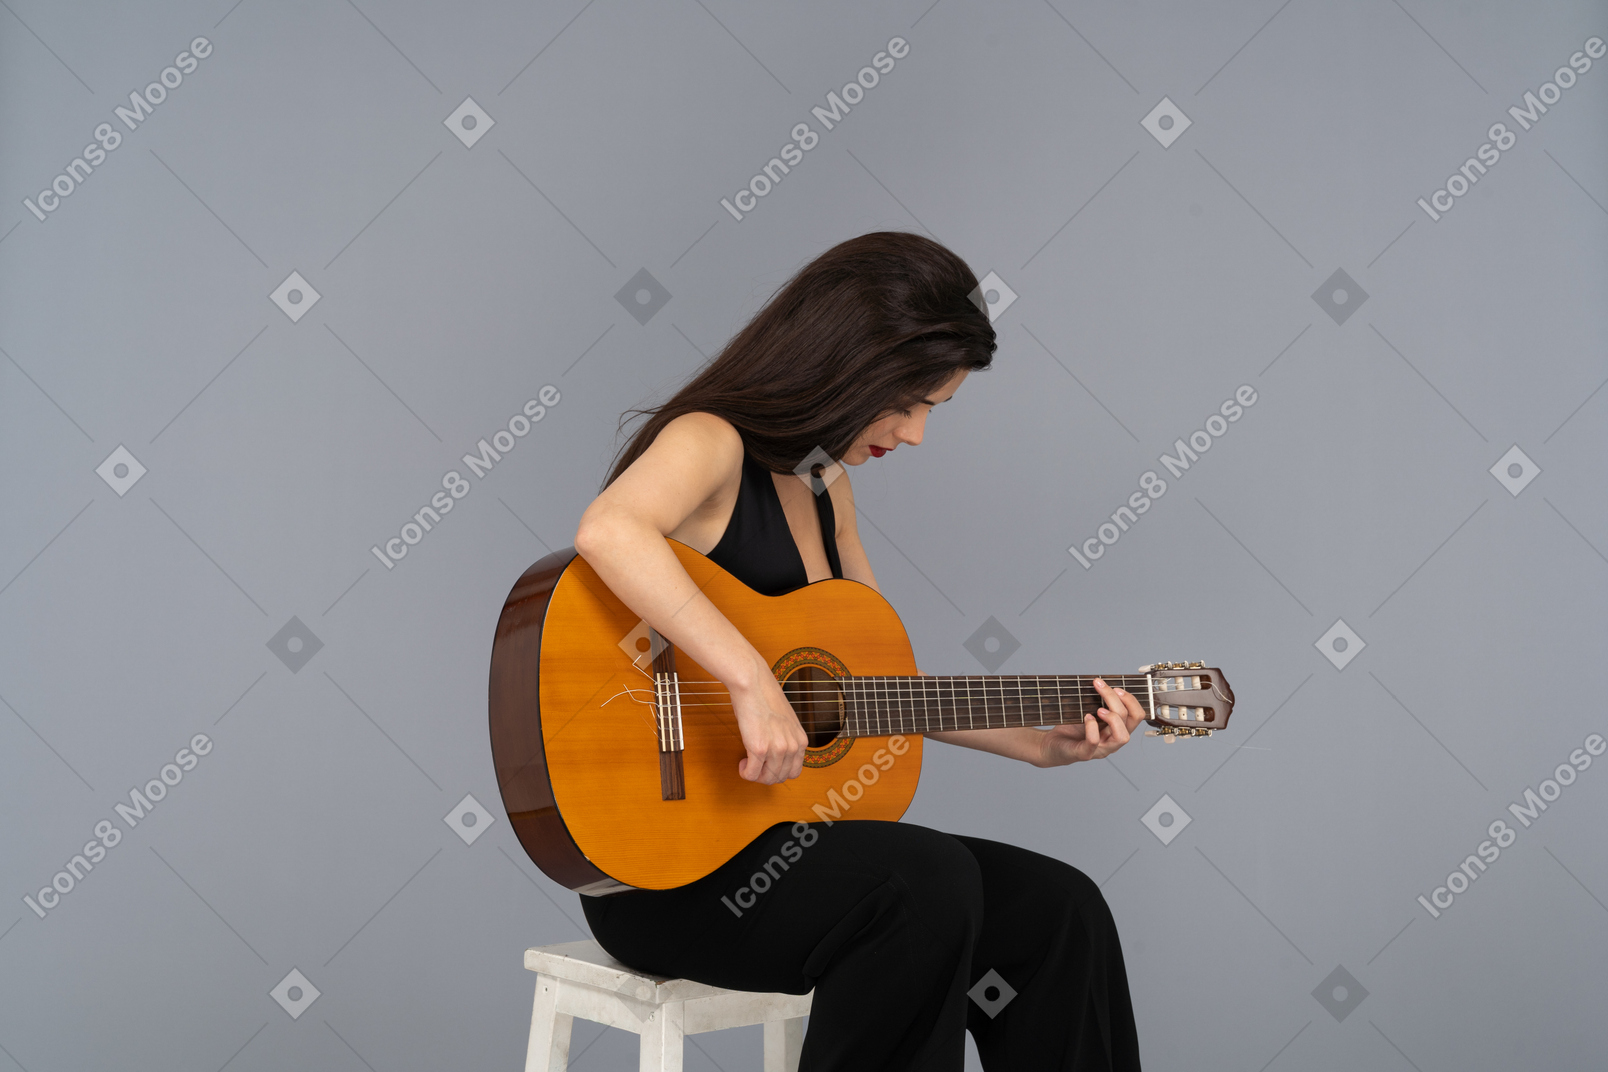 Three-quarter view of a sitting young lady in black suit playing guitar and looking down